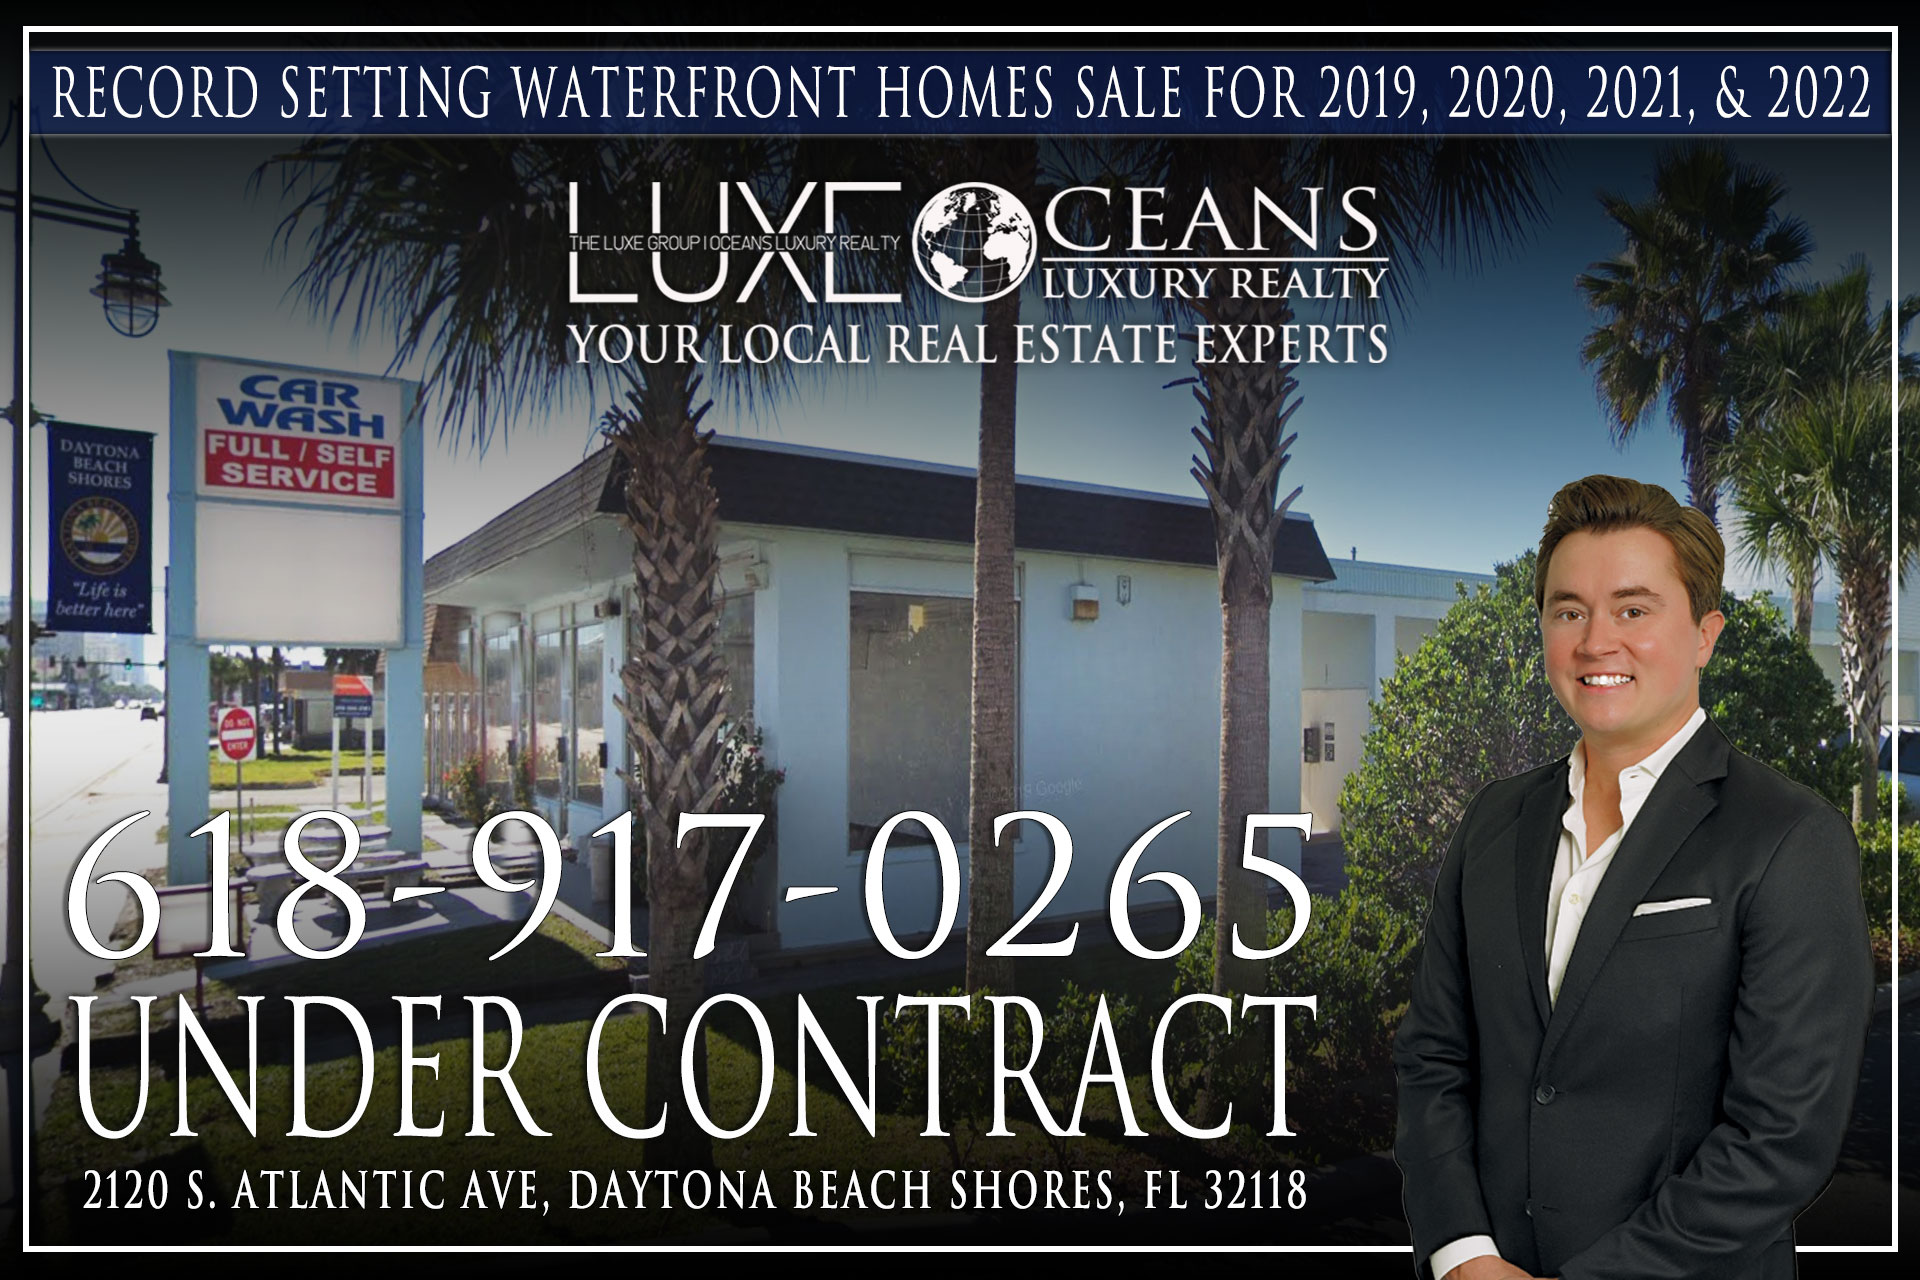 2120 S Atlantic Ave in Daytona Beach Shores FL Under Contract. Commerical Real Estate Sales. The LUXE Group at Oceans Luxury Realty 386-299-4043